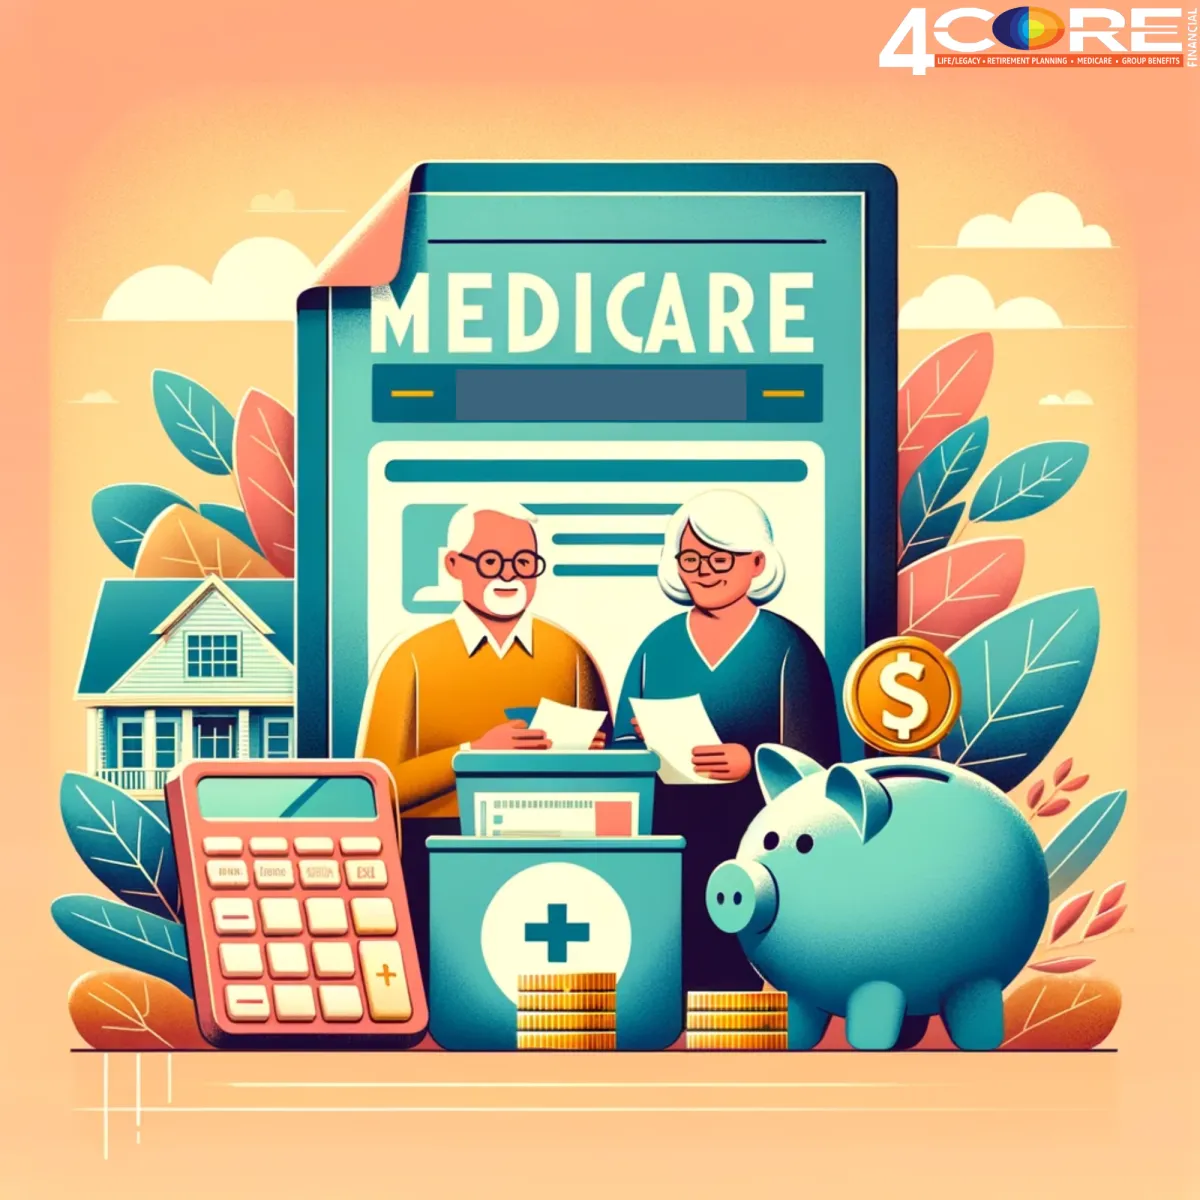 Cover image for a Medicare annuity blog, featuring symbols of Medicare like a card, financial items including annuity contracts, a calculator, and a piggy bank. The background shows a happy retired couple reviewing documents, set against a serene retirement home. The overall color palette is calming, conveying stability and security in financial planning for healthcare in retirement.